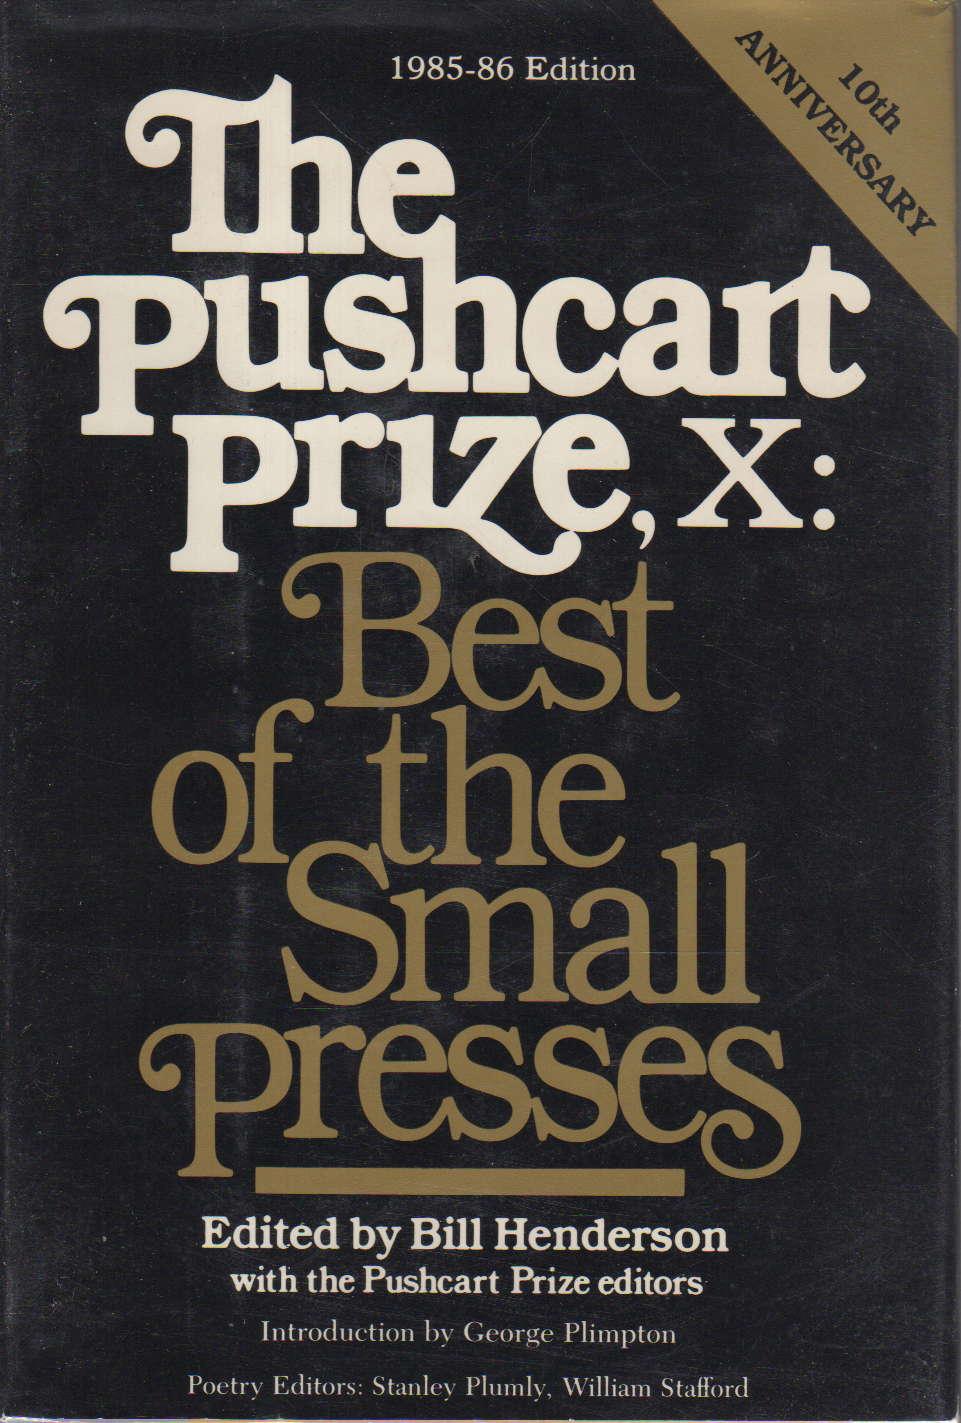 THE PUSHCART PRIZE X: Best of the Small Presses, 1985 - 1986. - Anthology, signed] Bill Henderson, Bill, editor. Alberto Alvarez Rios, signed